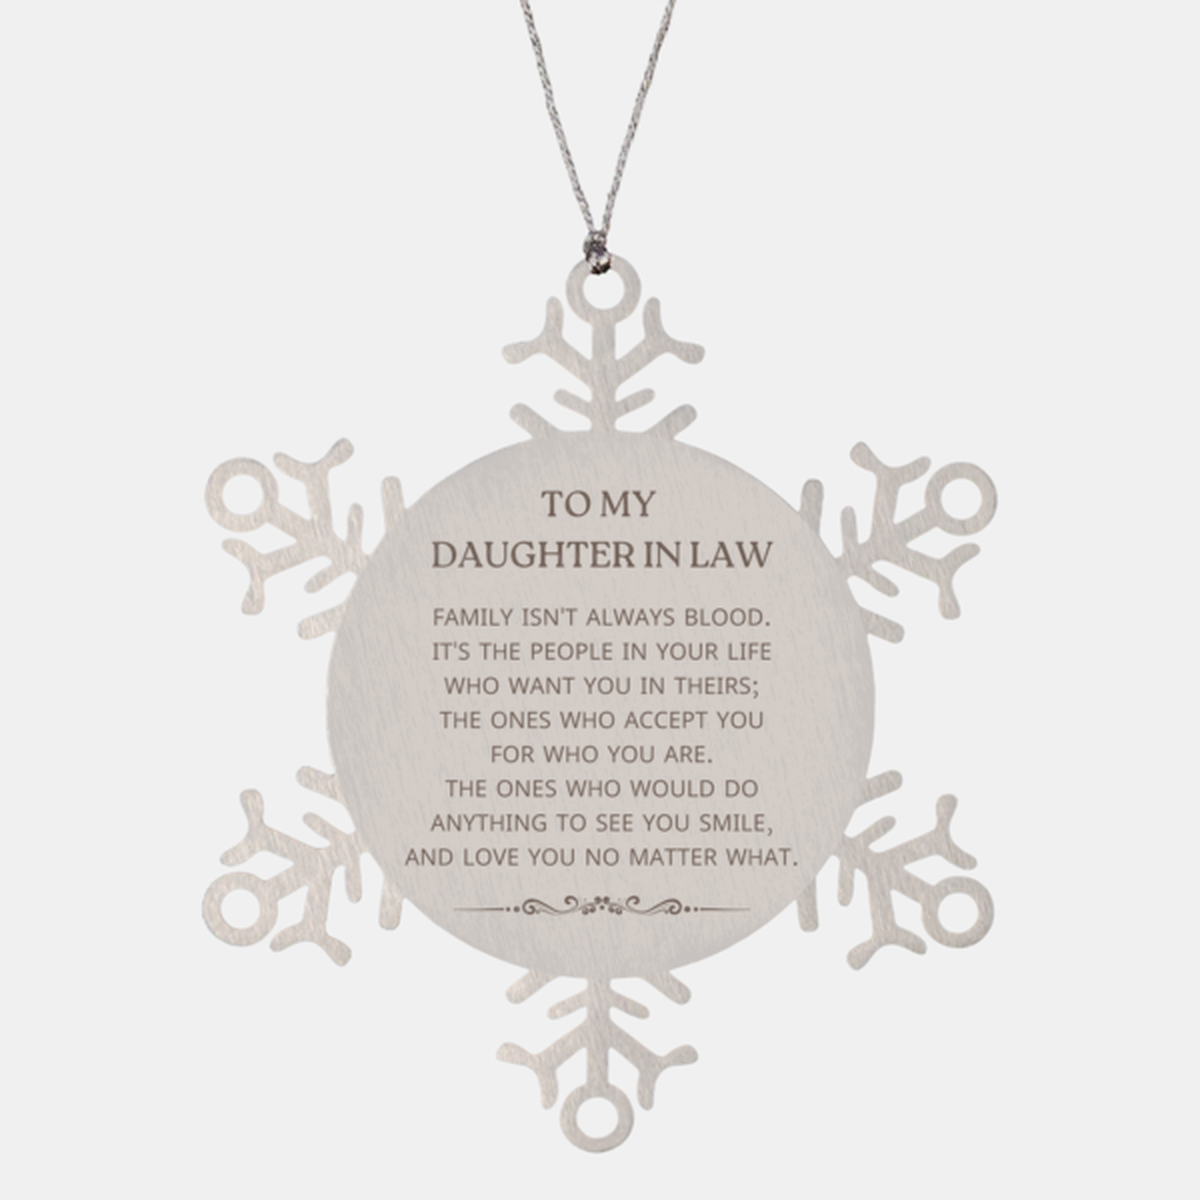 To My Daughter In Law Gifts, Family isn't always blood, Daughter In Law Snowflake Ornament, Birthday Christmas Unique Present For Daughter In Law